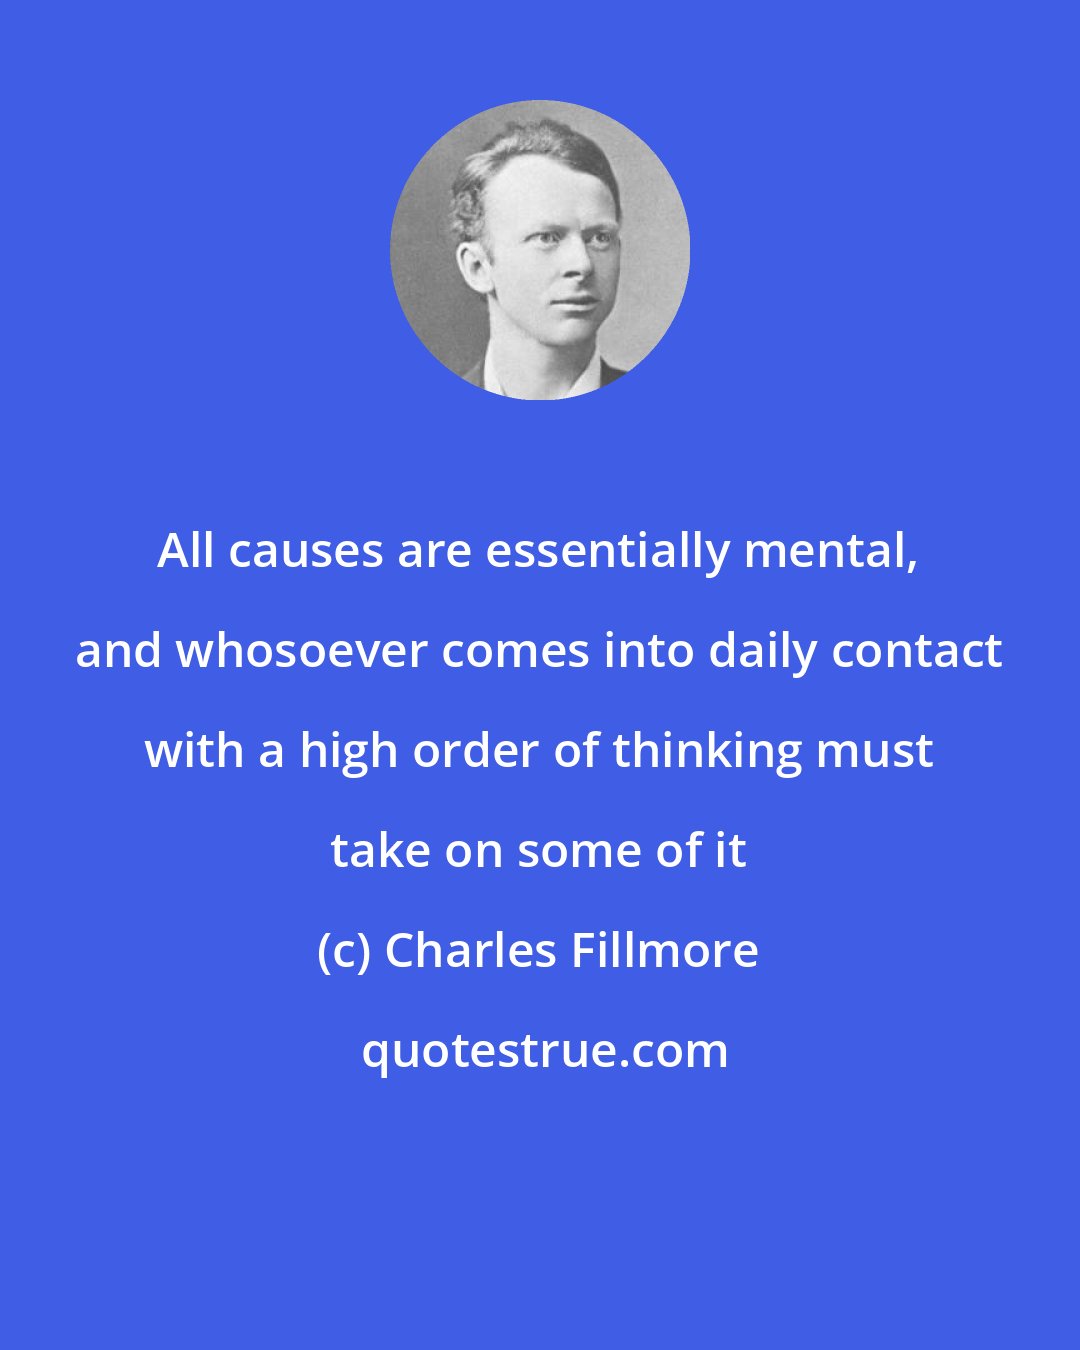 Charles Fillmore: All causes are essentially mental, and whosoever comes into daily contact with a high order of thinking must take on some of it